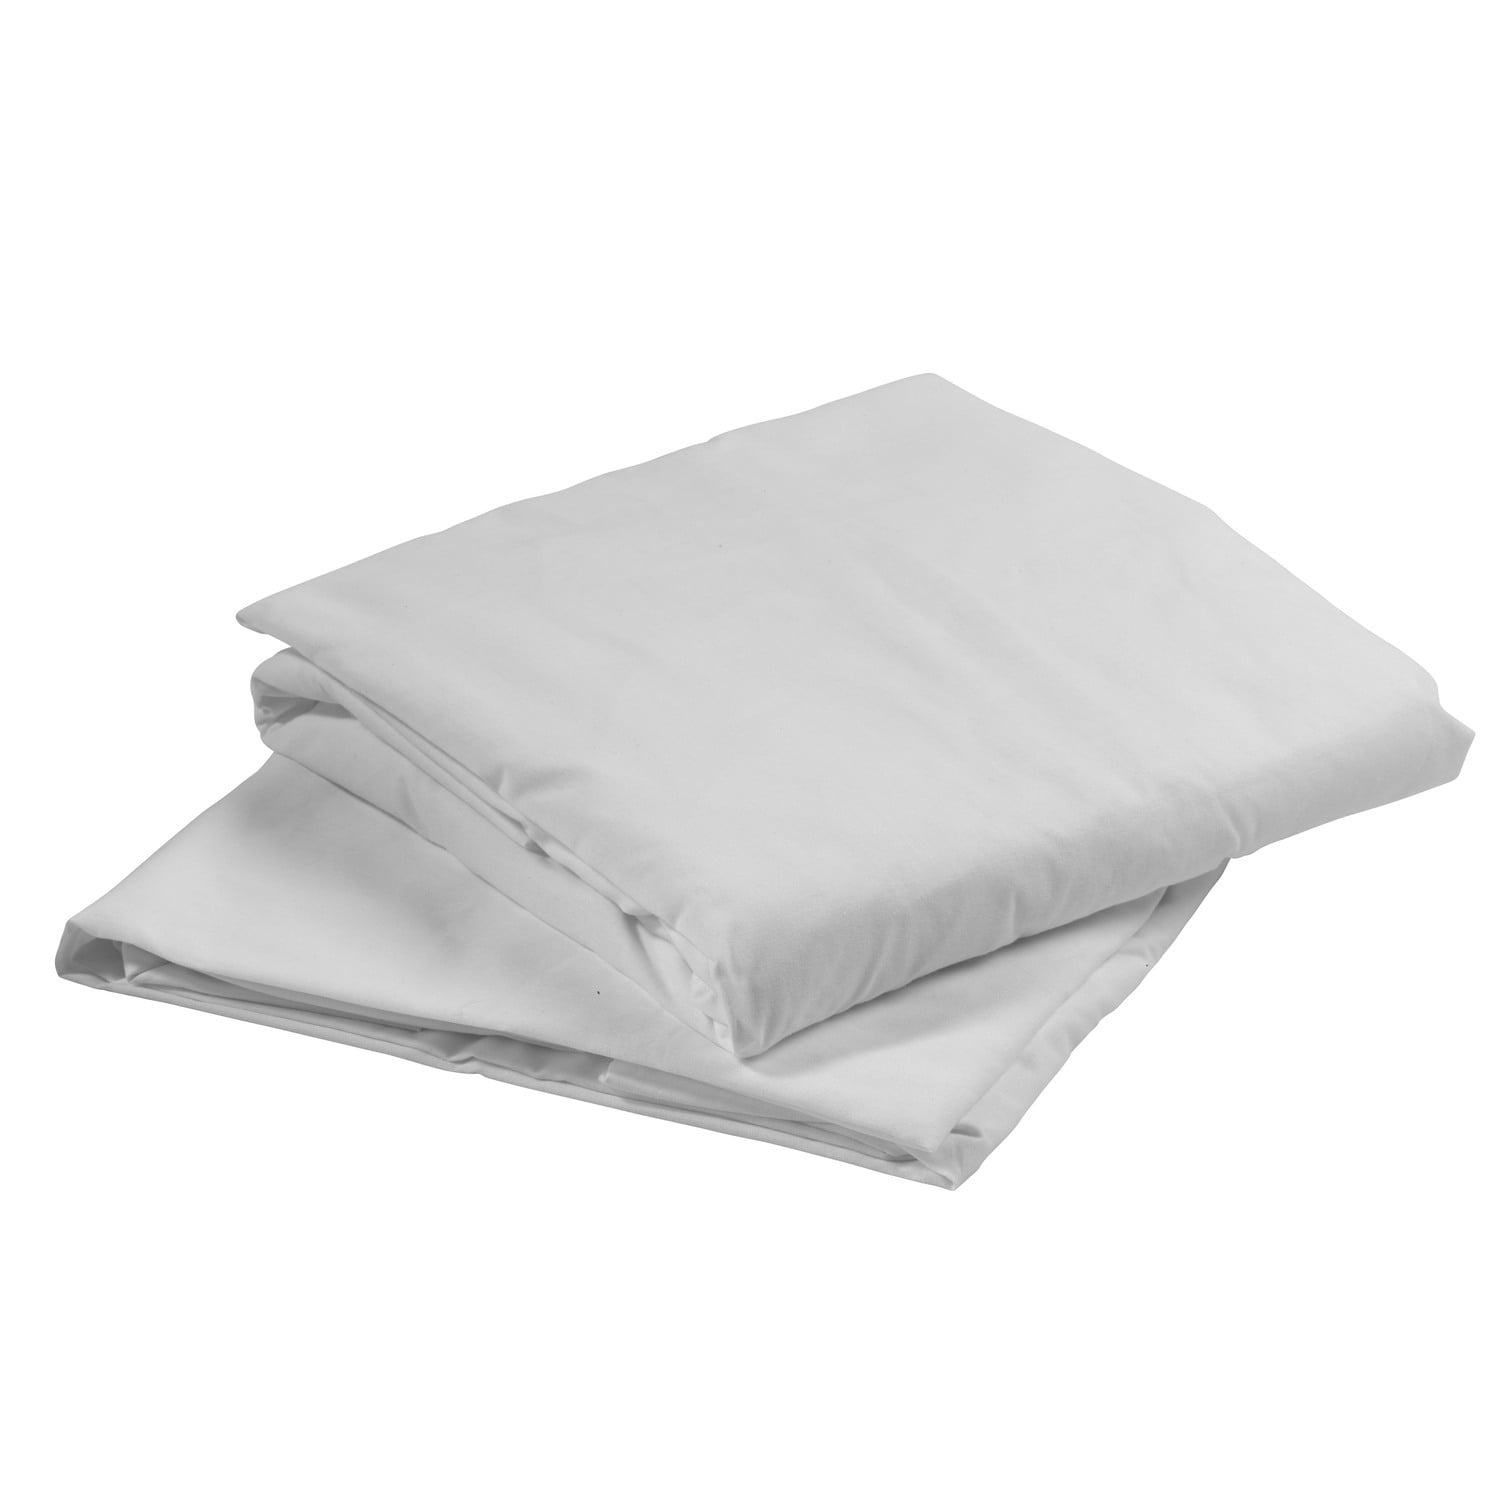 1  white medco hospital fitted healthcare bed sheet 36x75x10 best deal online 